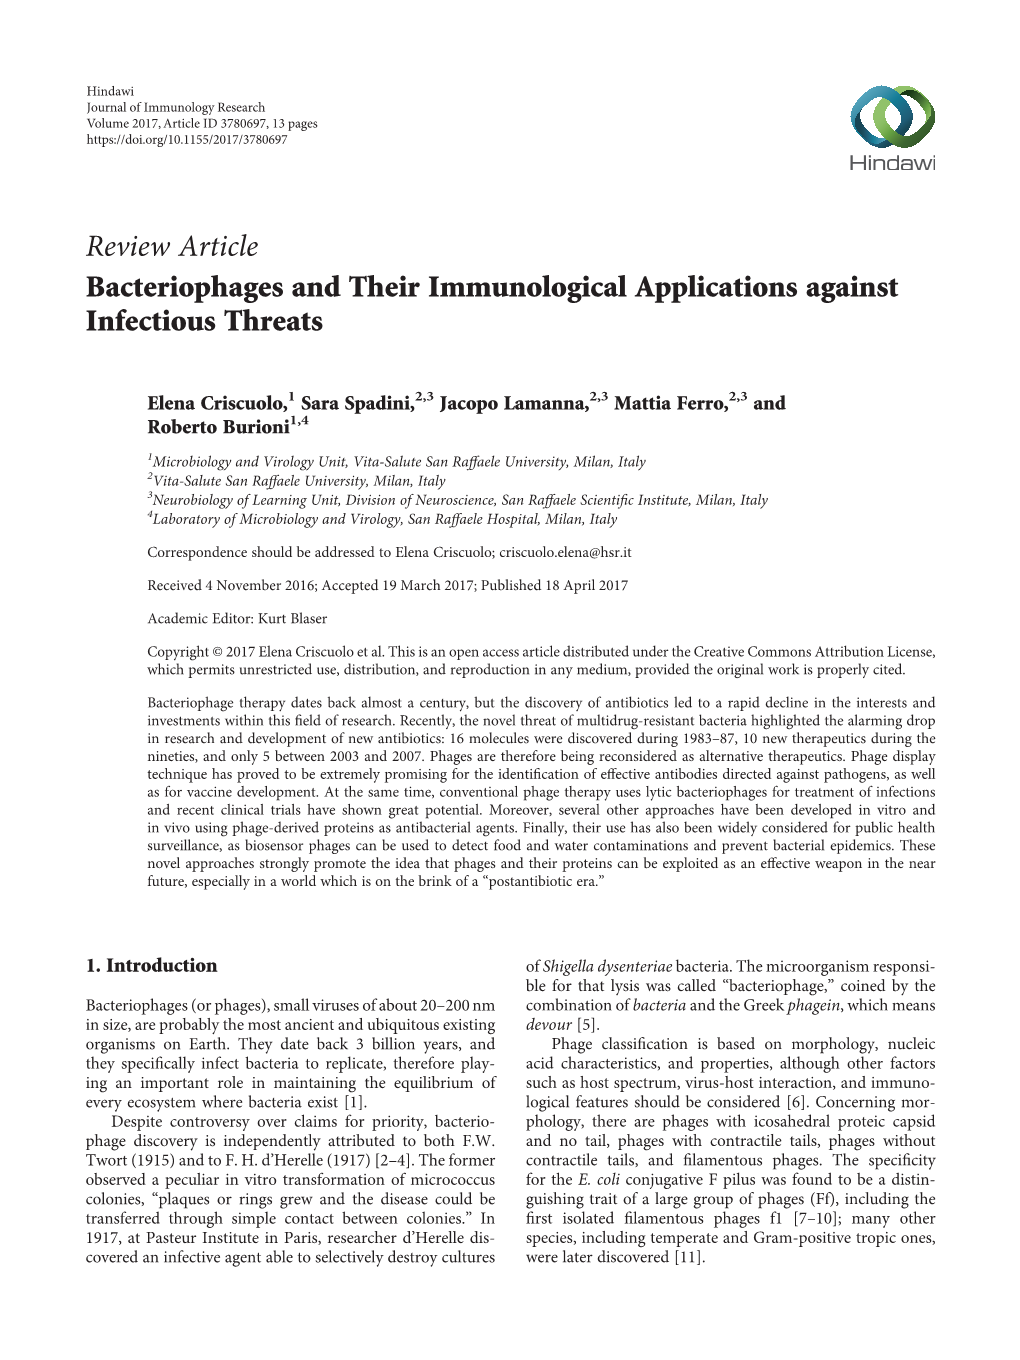 Bacteriophages and Their Immunological Applications Against Infectious Threats